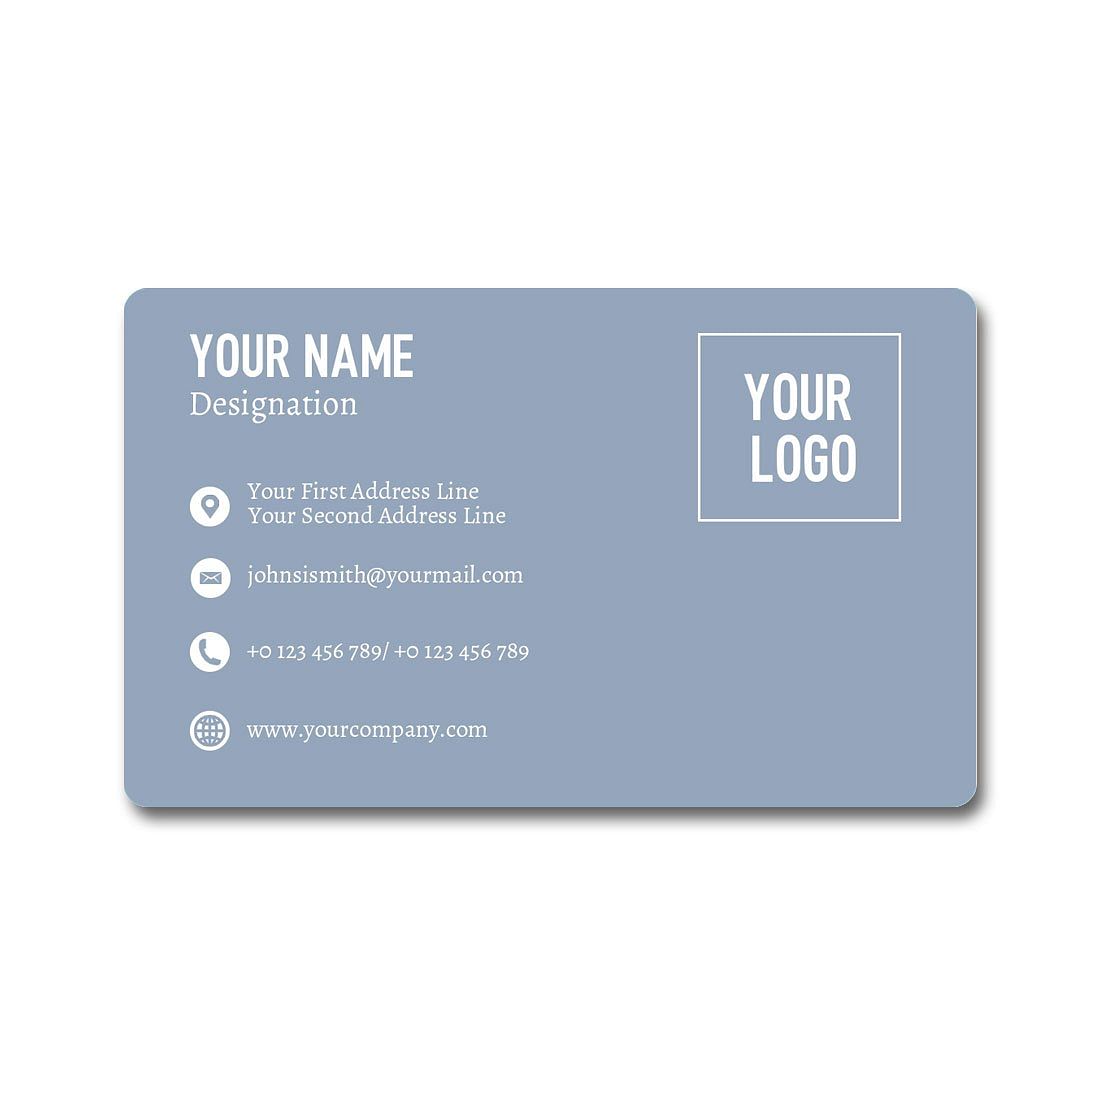 Custom NFC Business Cards Corporate Gifts Ideas  -  Add Your Name Nutcase